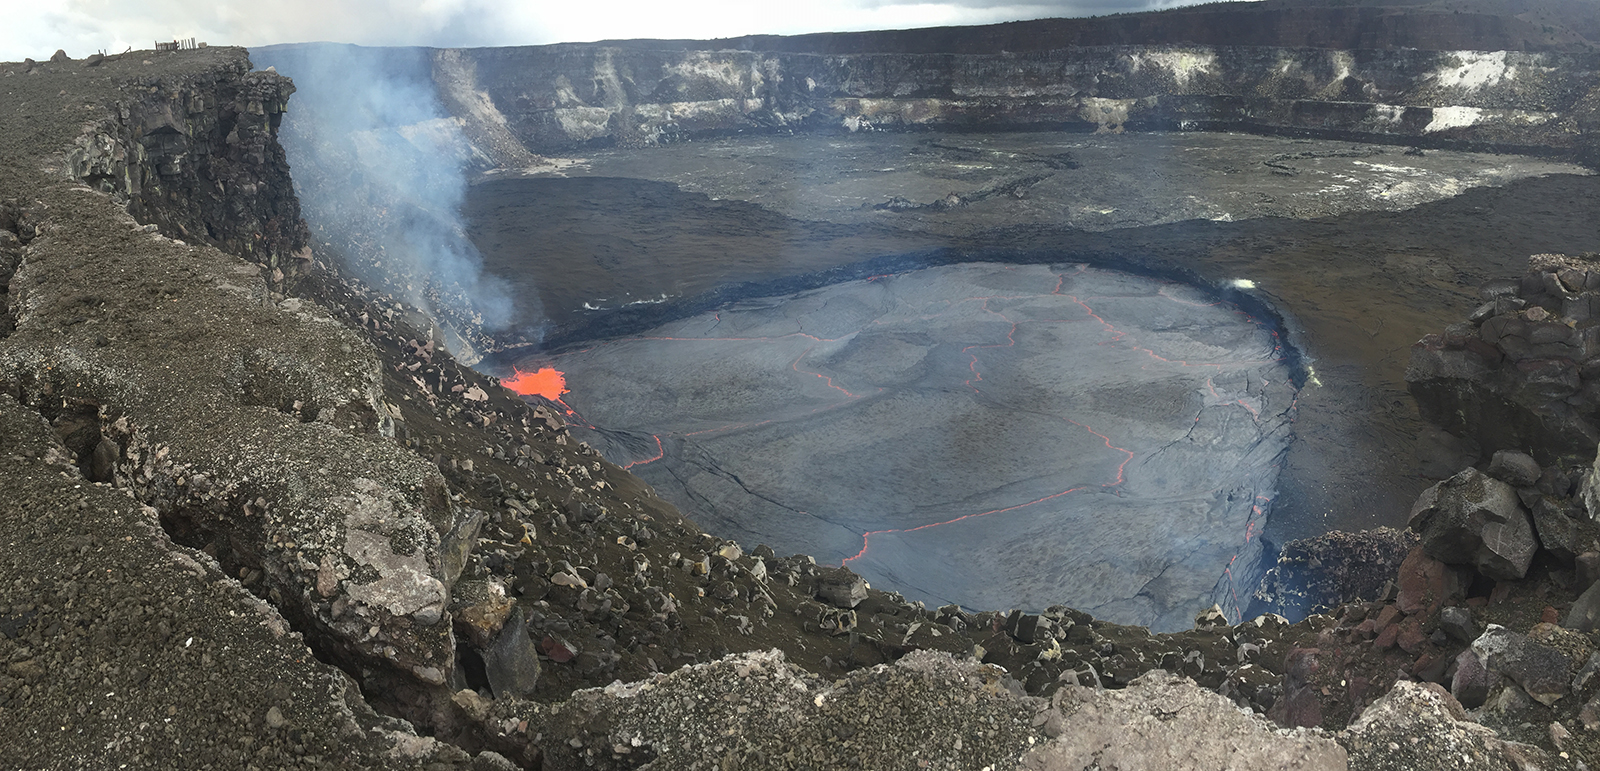 On Sept. 10, 2016, Kīlauea Volcano’s summit lava lake rose to within 16 feet of the vent rim. This is the highest level the lake has reached since it overflowed the vent in April-May 2015, when lava flowed onto the floor of Halemaʻumaʻu Crater, forming the dark-colored rock visible on either side of the vent. Charred and broken fencing (upper left) is all that remains of a former visitor overlook, closed to the public since 2008 due to explosions, volcanic gas emissions, and other hazards associated with the lava lake. USGS photo.